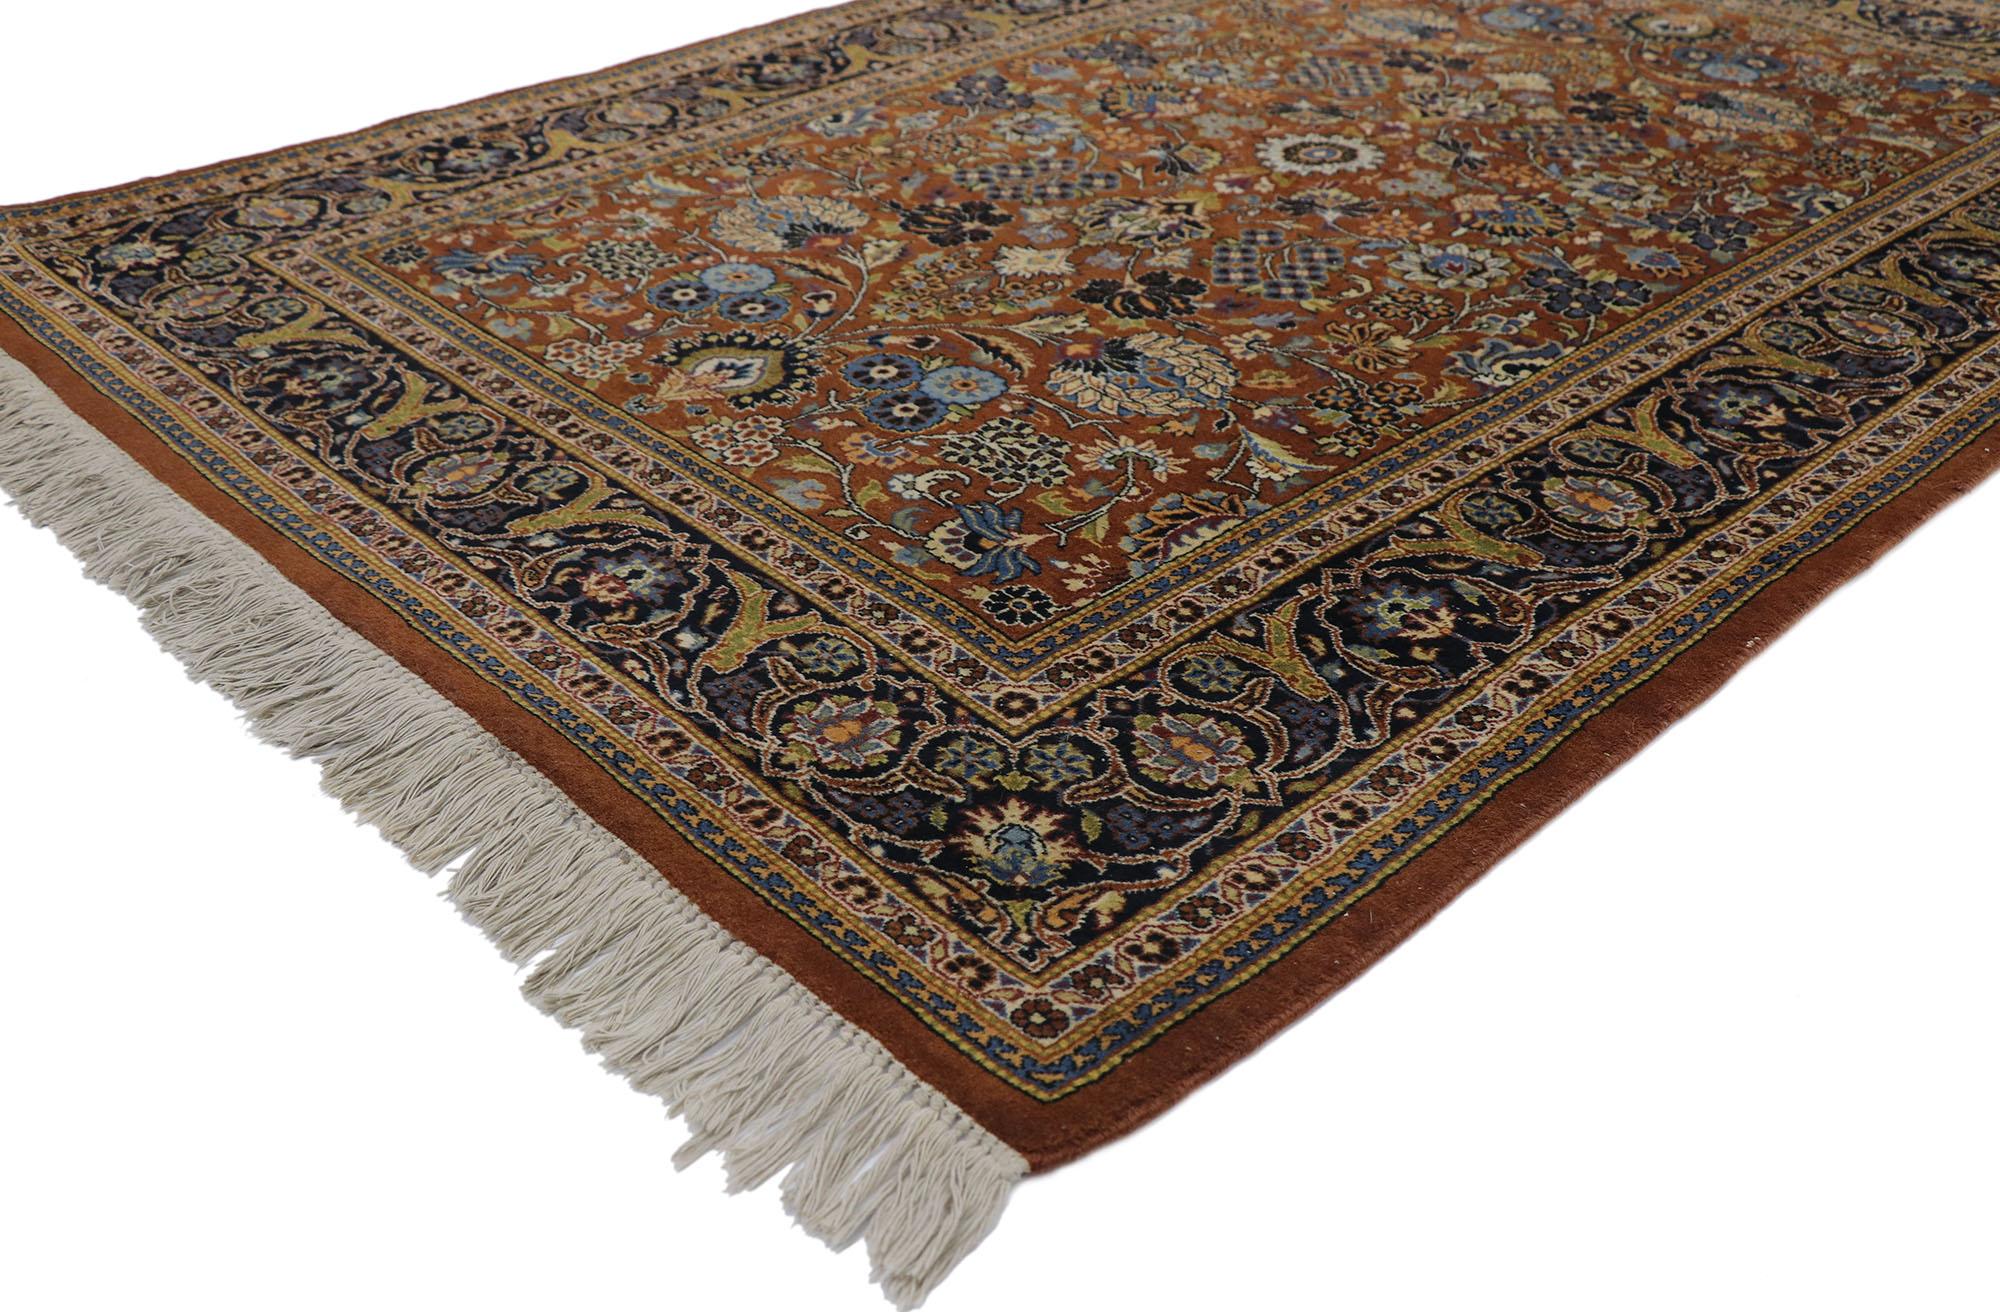 ?78138 Vintage Pakistani rug, 04'02 x 06'02.
Emanating traditional style with incredible detail and texture, this hand knotted Pakistani rug is a captivating vision of woven beauty. The timeless botanical design and sophisticated colors woven into